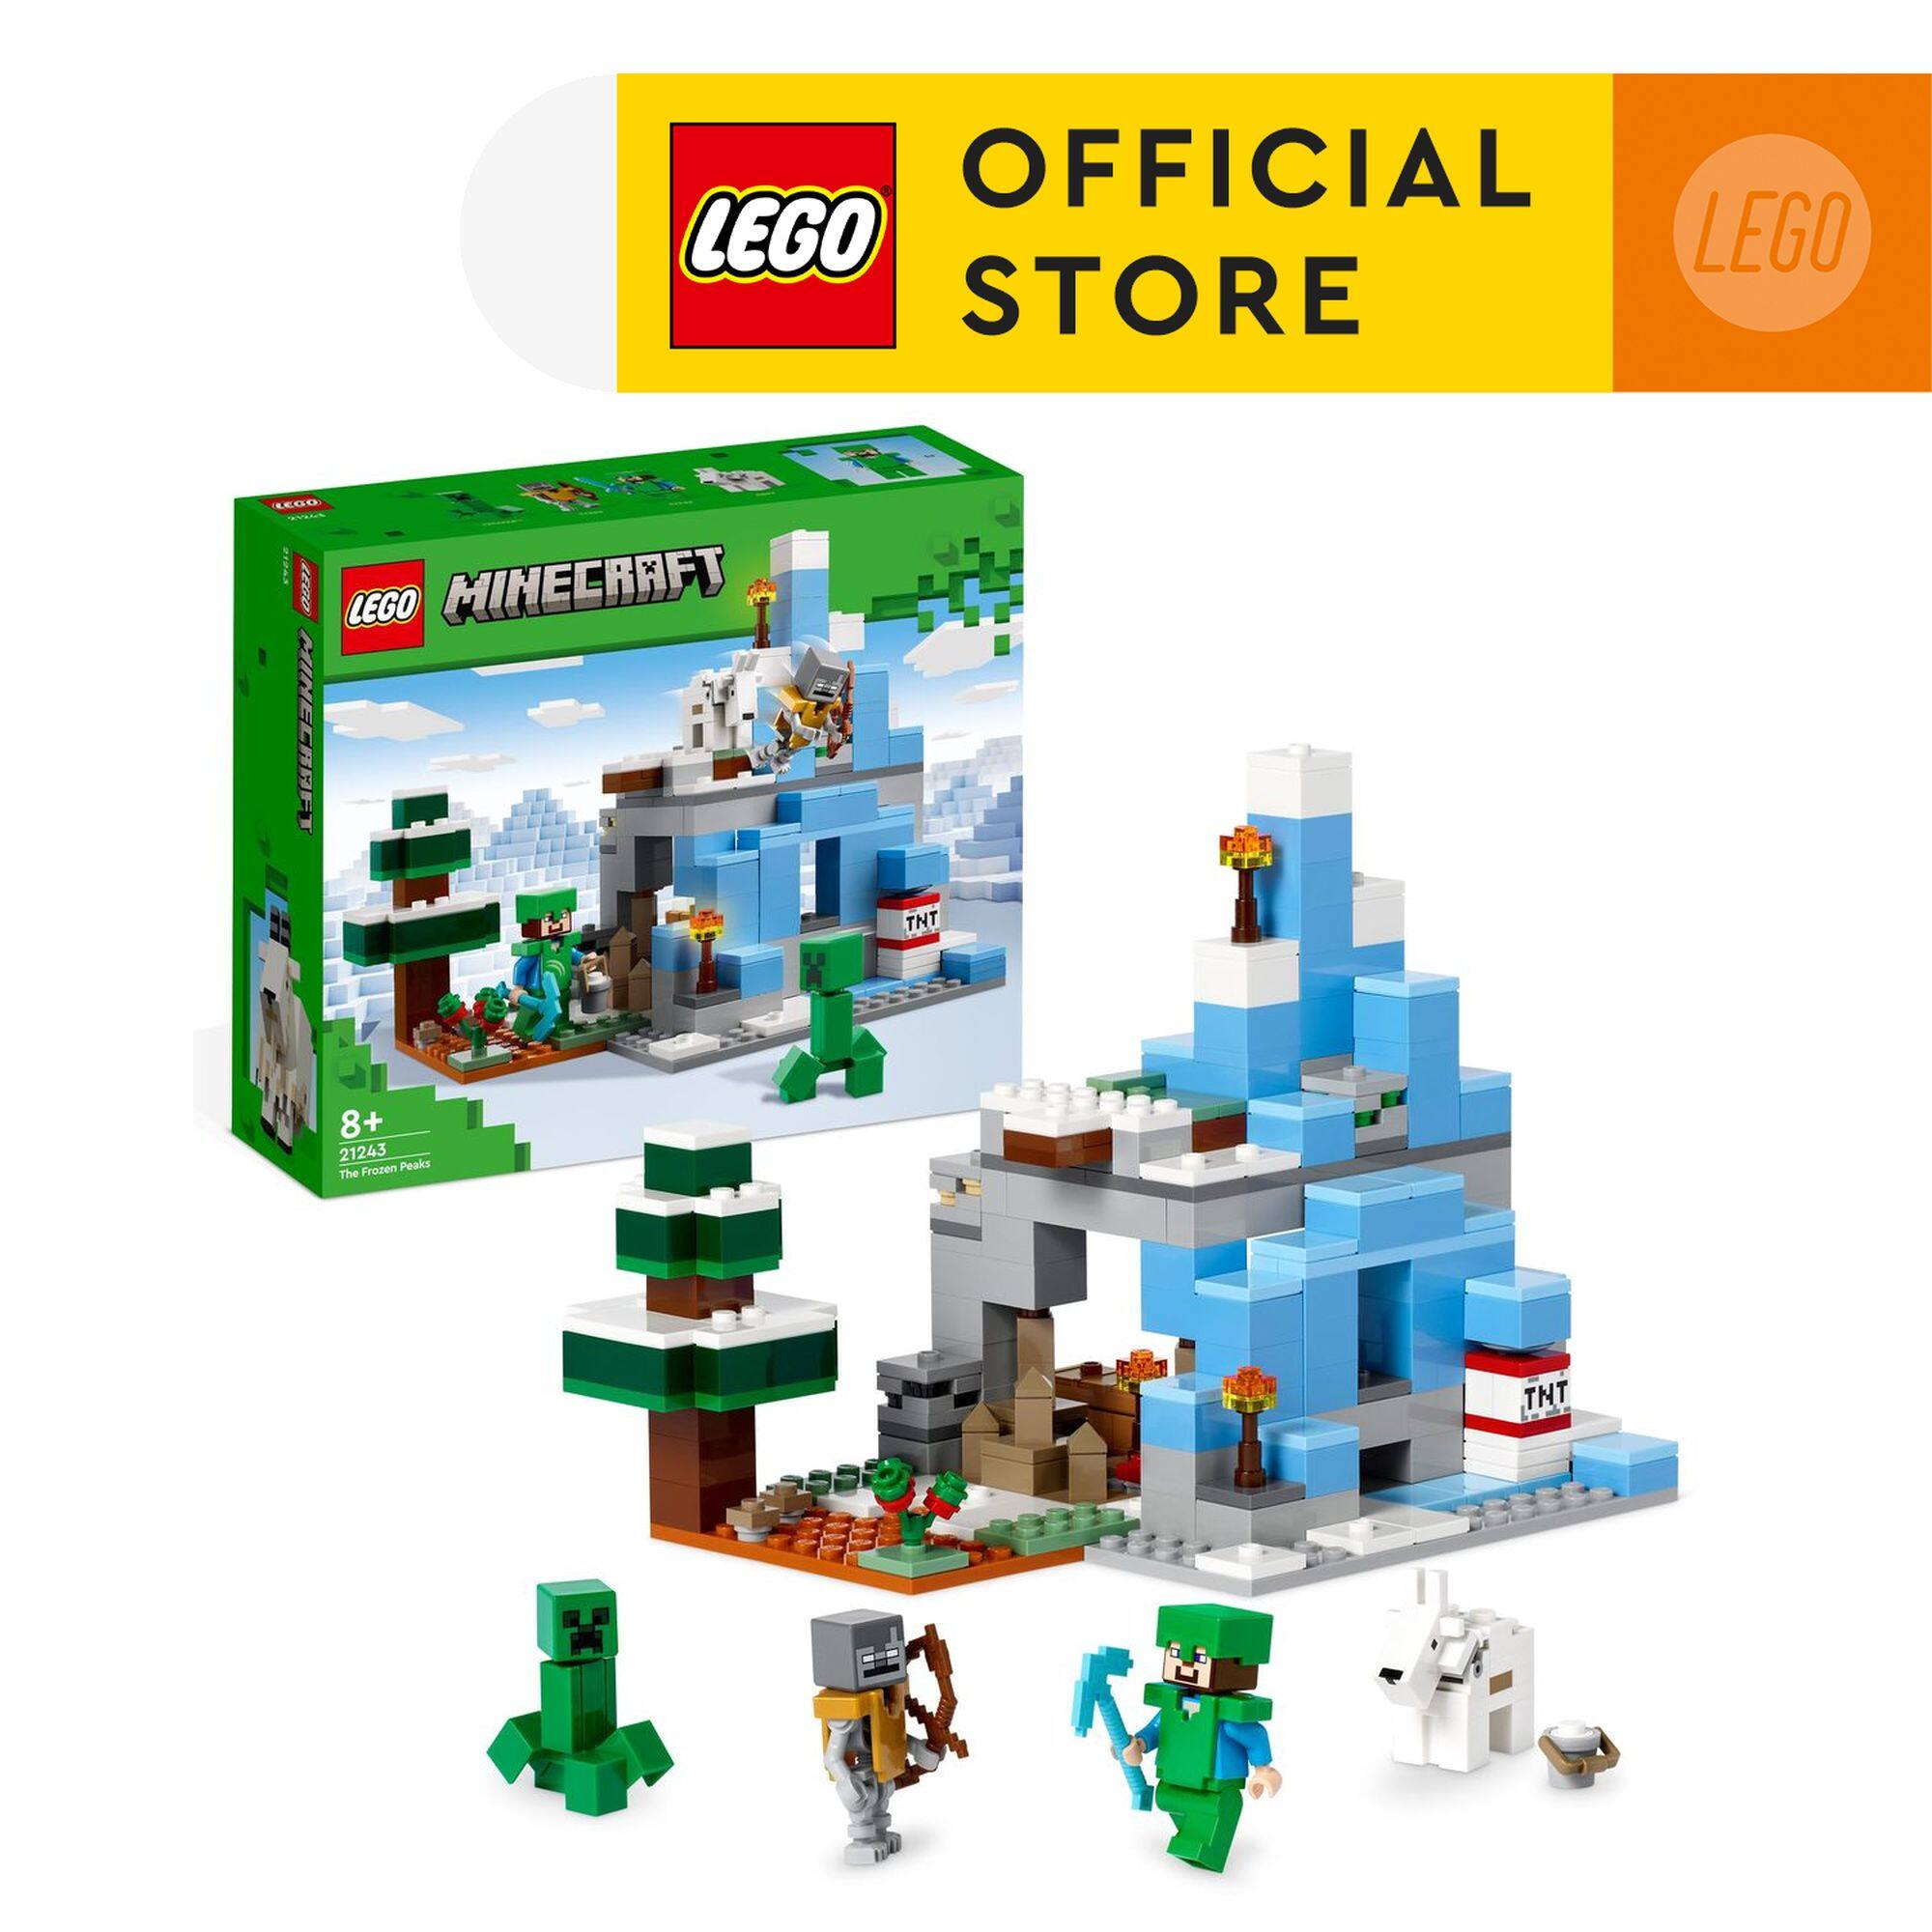 LEGO® Minecraft® The Crafting Box 4.0 21249 Building Toy Set (605 Pieces), Shop Today. Get it Tomorrow!